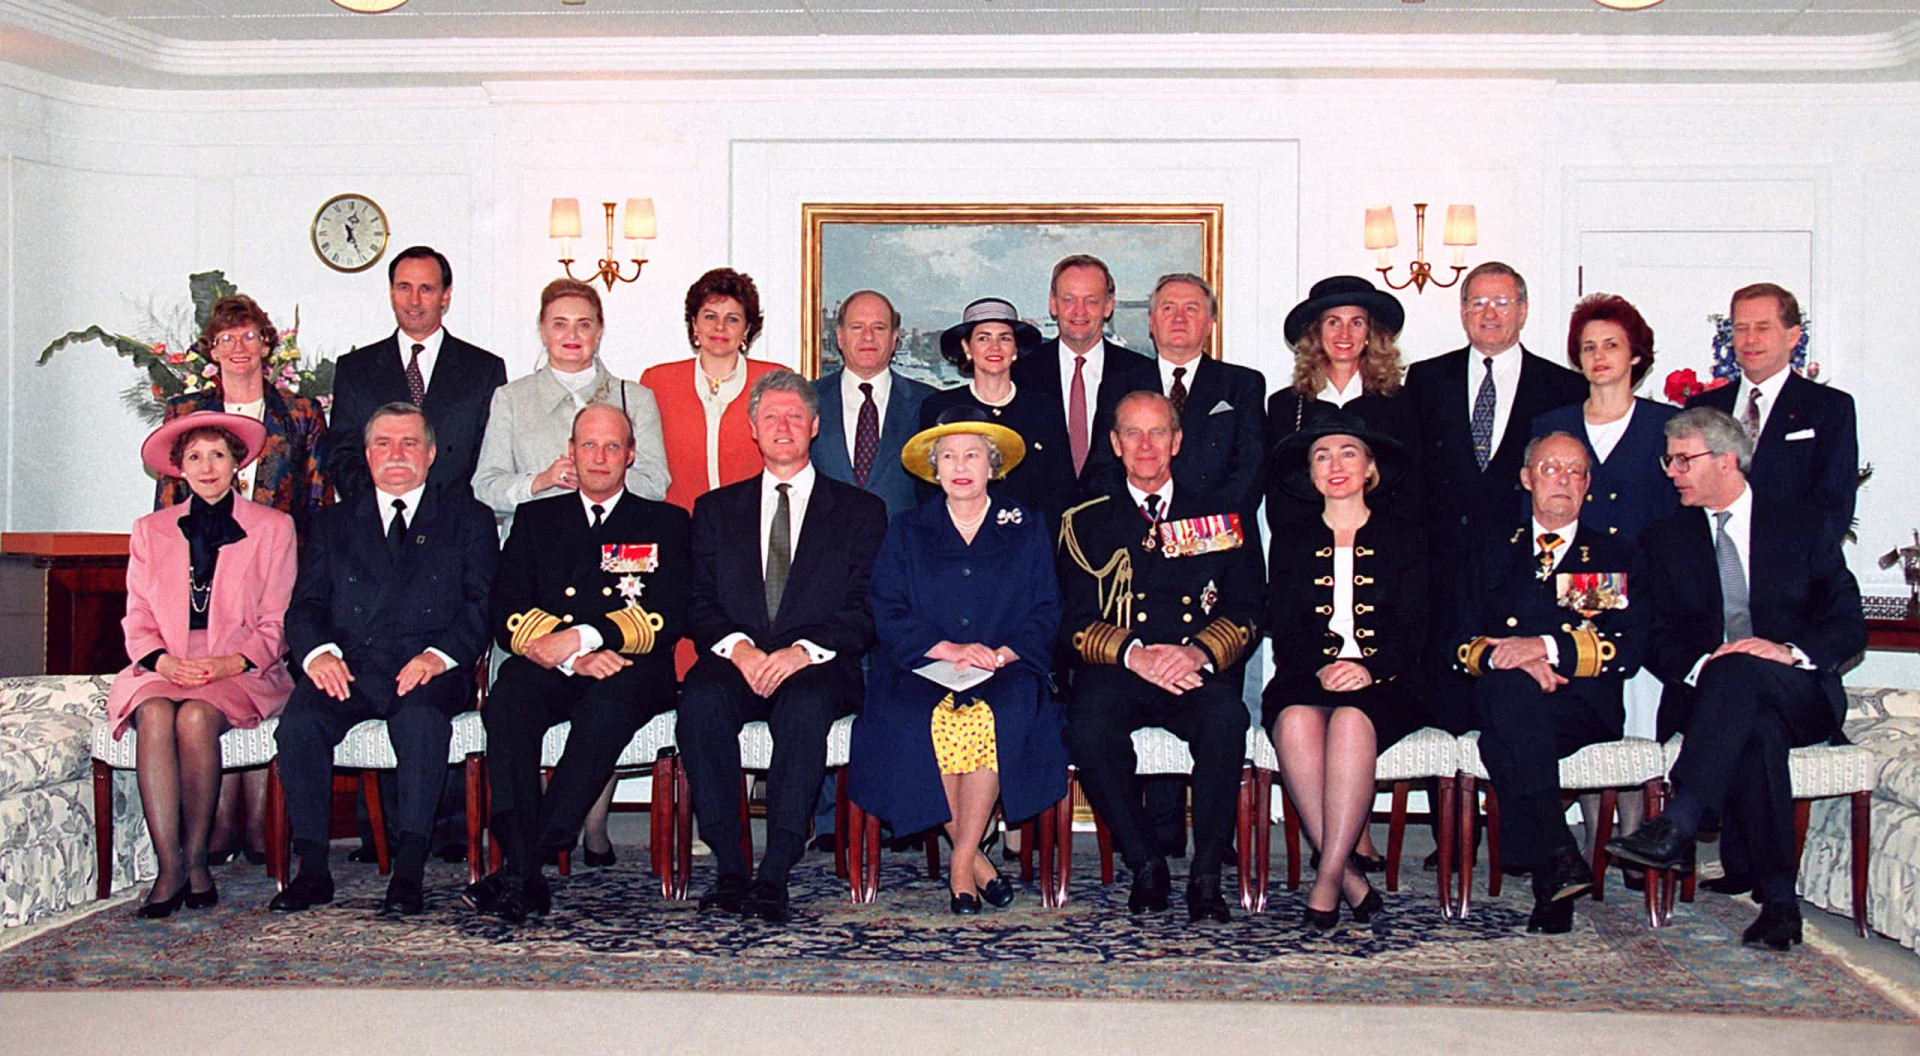 <p>The Queen, Heads of State, and their wives aboard the Royal Yacht <em>Britannia</em> for the D-Day 50th anniversary celebrations, US President Bill Clinton among them. Besides hosting politically- and diplomatically-themed functions, Britannia held numerous "Sea Days"— British overseas trade missions to promote business, trade, and industry around the globe.</p><p><a href="https://www.msn.com/en-sg/community/channel/vid-7xx8mnucu55yw63we9va2gwr7uihbxwc68fxqp25x6tg4ftibpra?cvid=94631541bc0f4f89bfd59158d696ad7e">Follow us and access great exclusive content every day</a></p>